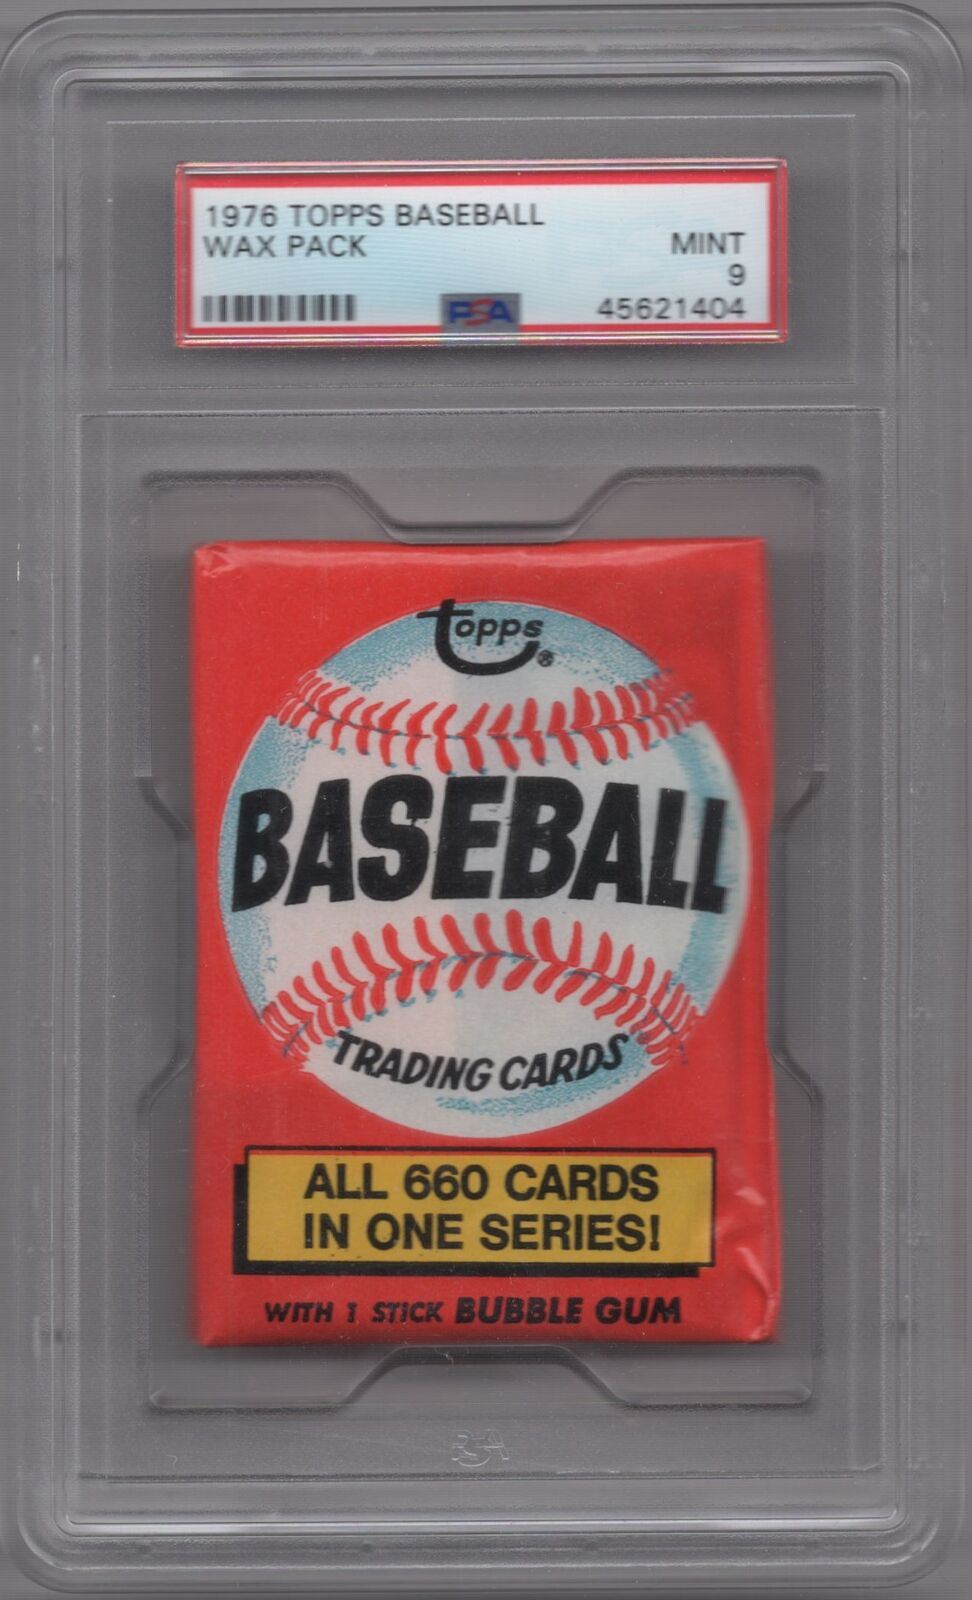 1976 Topps Wax Pack BB45621404 PSA 9 #SEALED